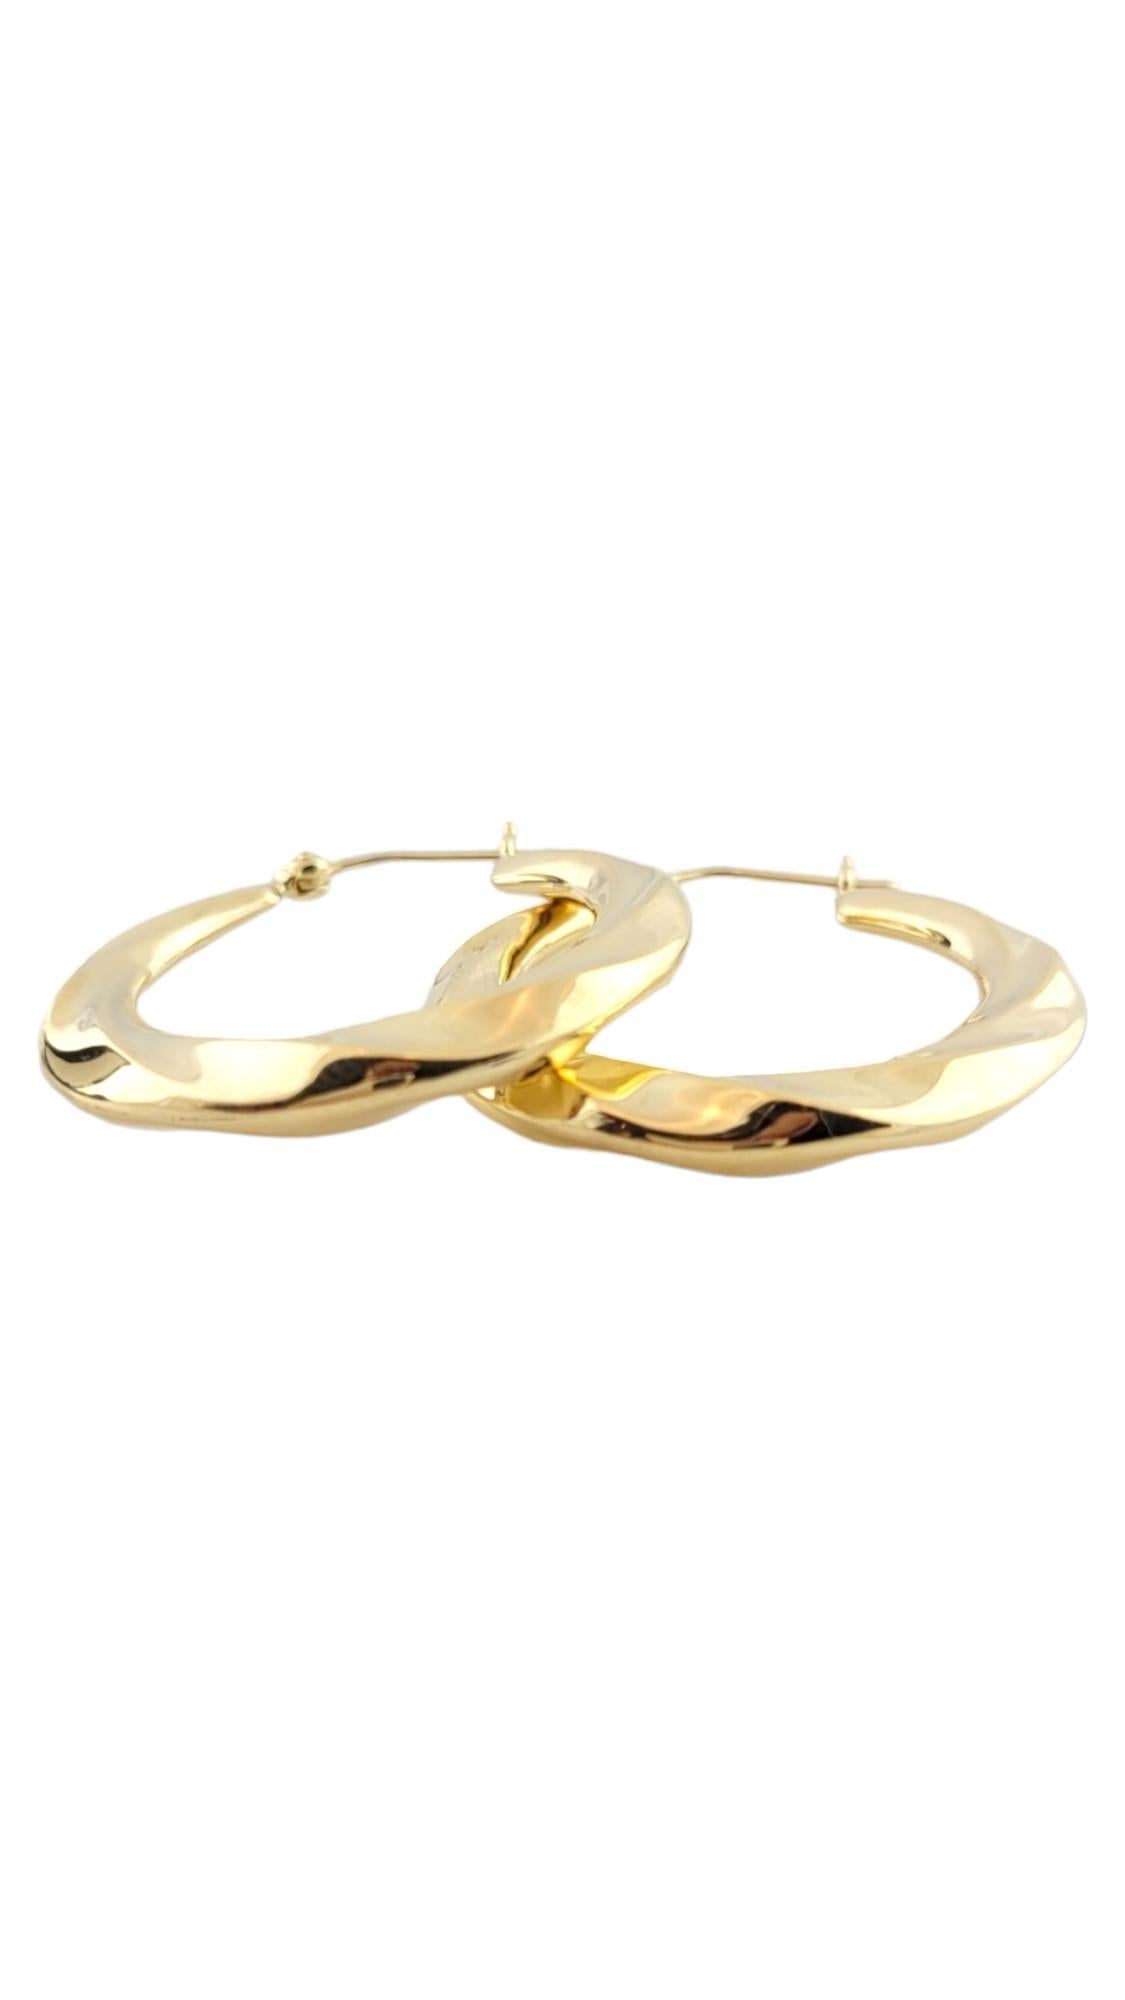 Vintage 18K Yellow Gold Twist Hoop Earrings 

Hoop earrings in 18 Karat yellow gold with a twist design.

Weight: 2.5 dwt./3.92 g

Hallmark: M750

Size: 30.4 mm X 28.5 mm/1.2 in. X 1.1 in.

Approximately 3.8 mm thick.

Very good condition,